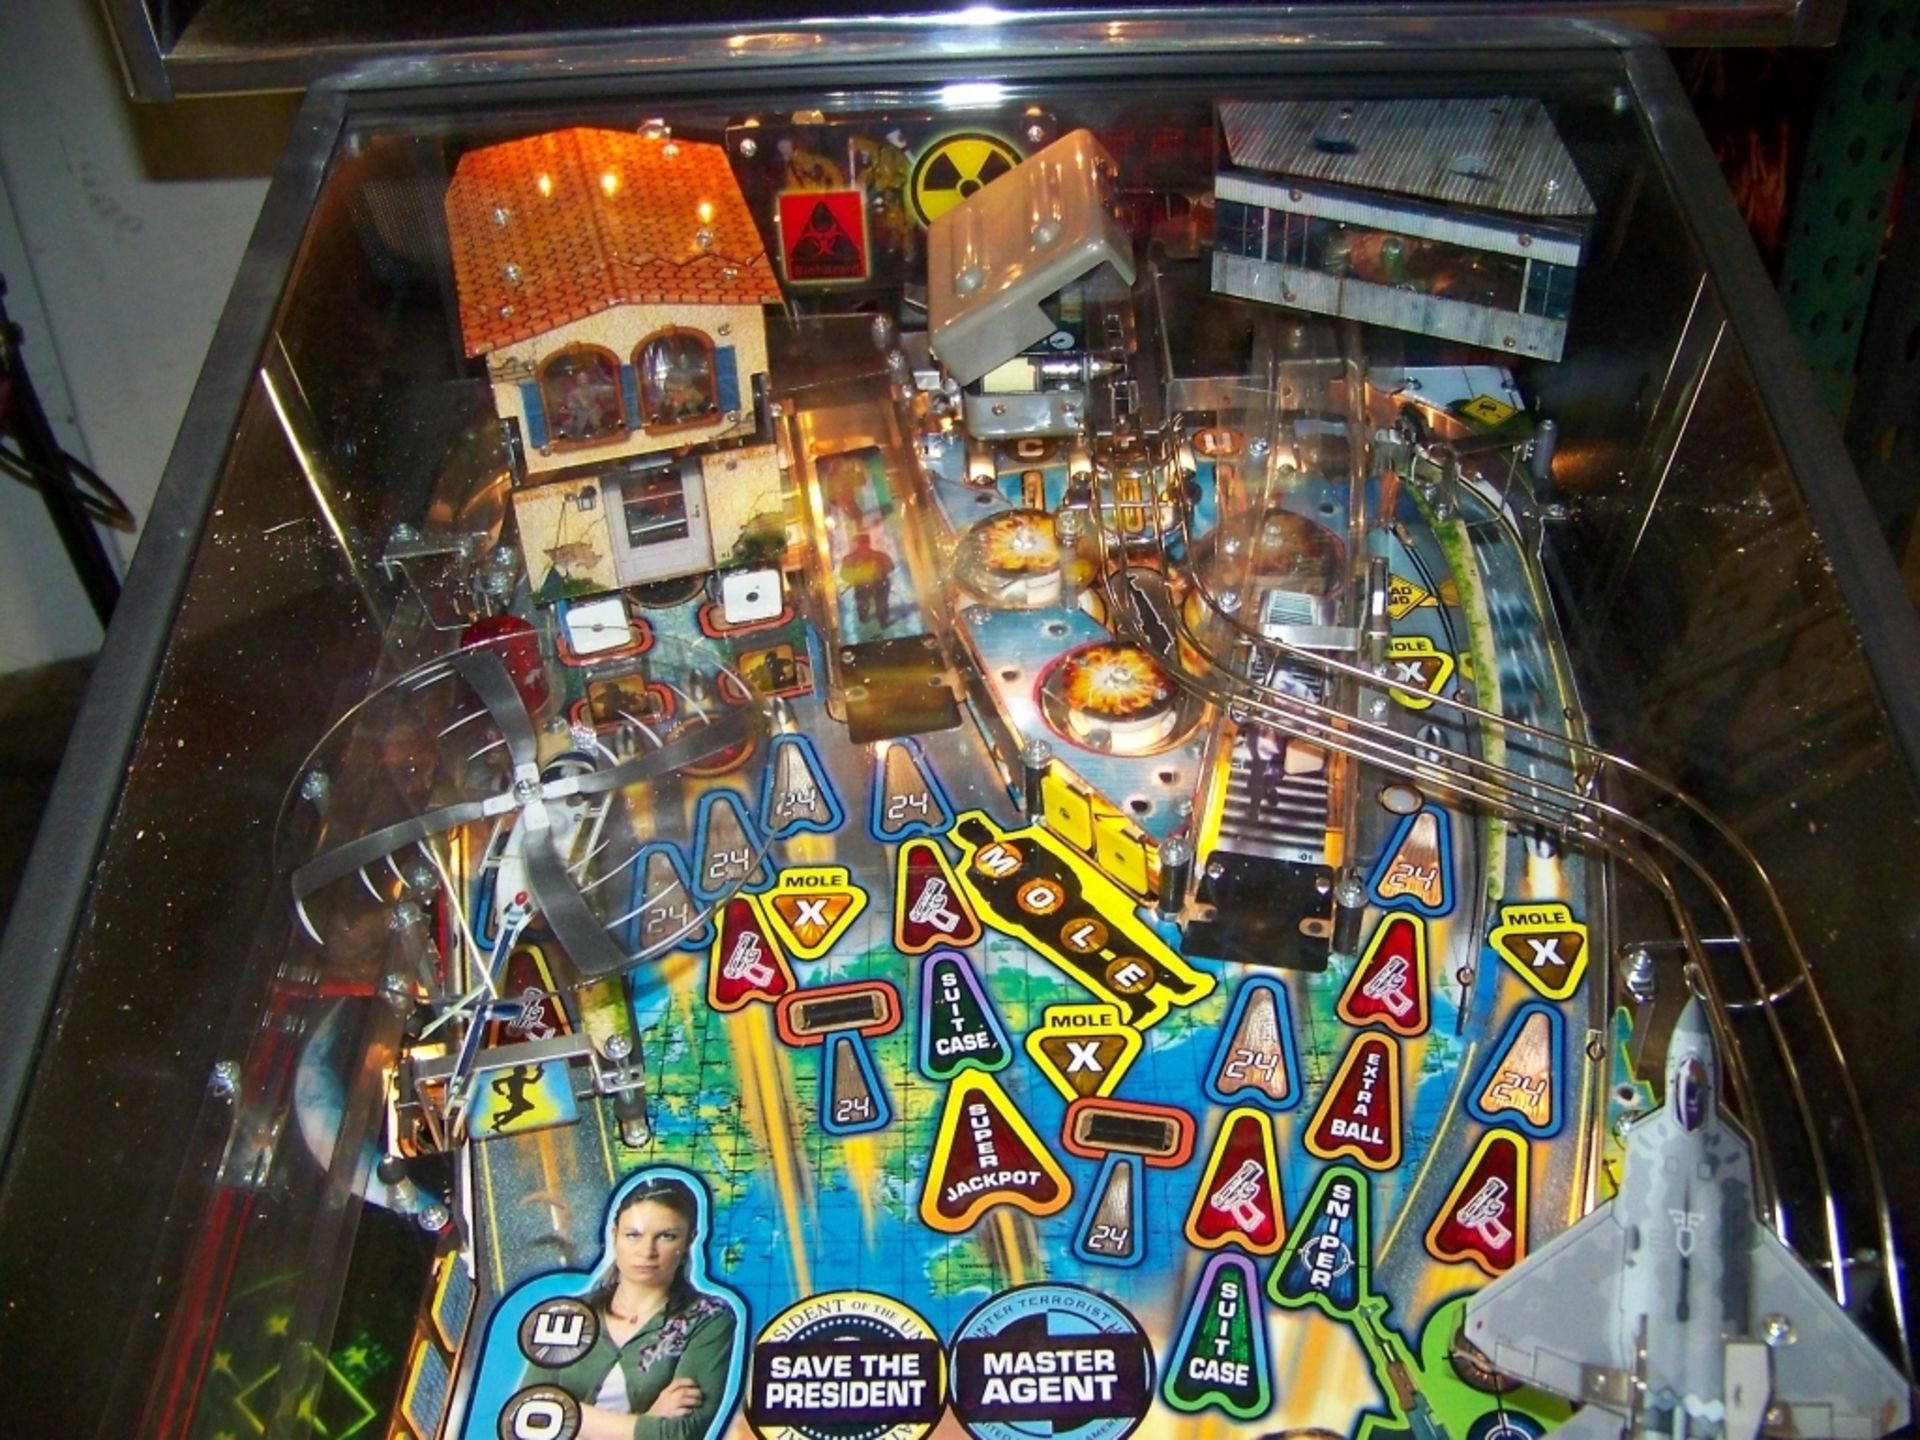 24 PINBALL MACHINE STERN 2009 CLEAN CONDITION - Image 6 of 12